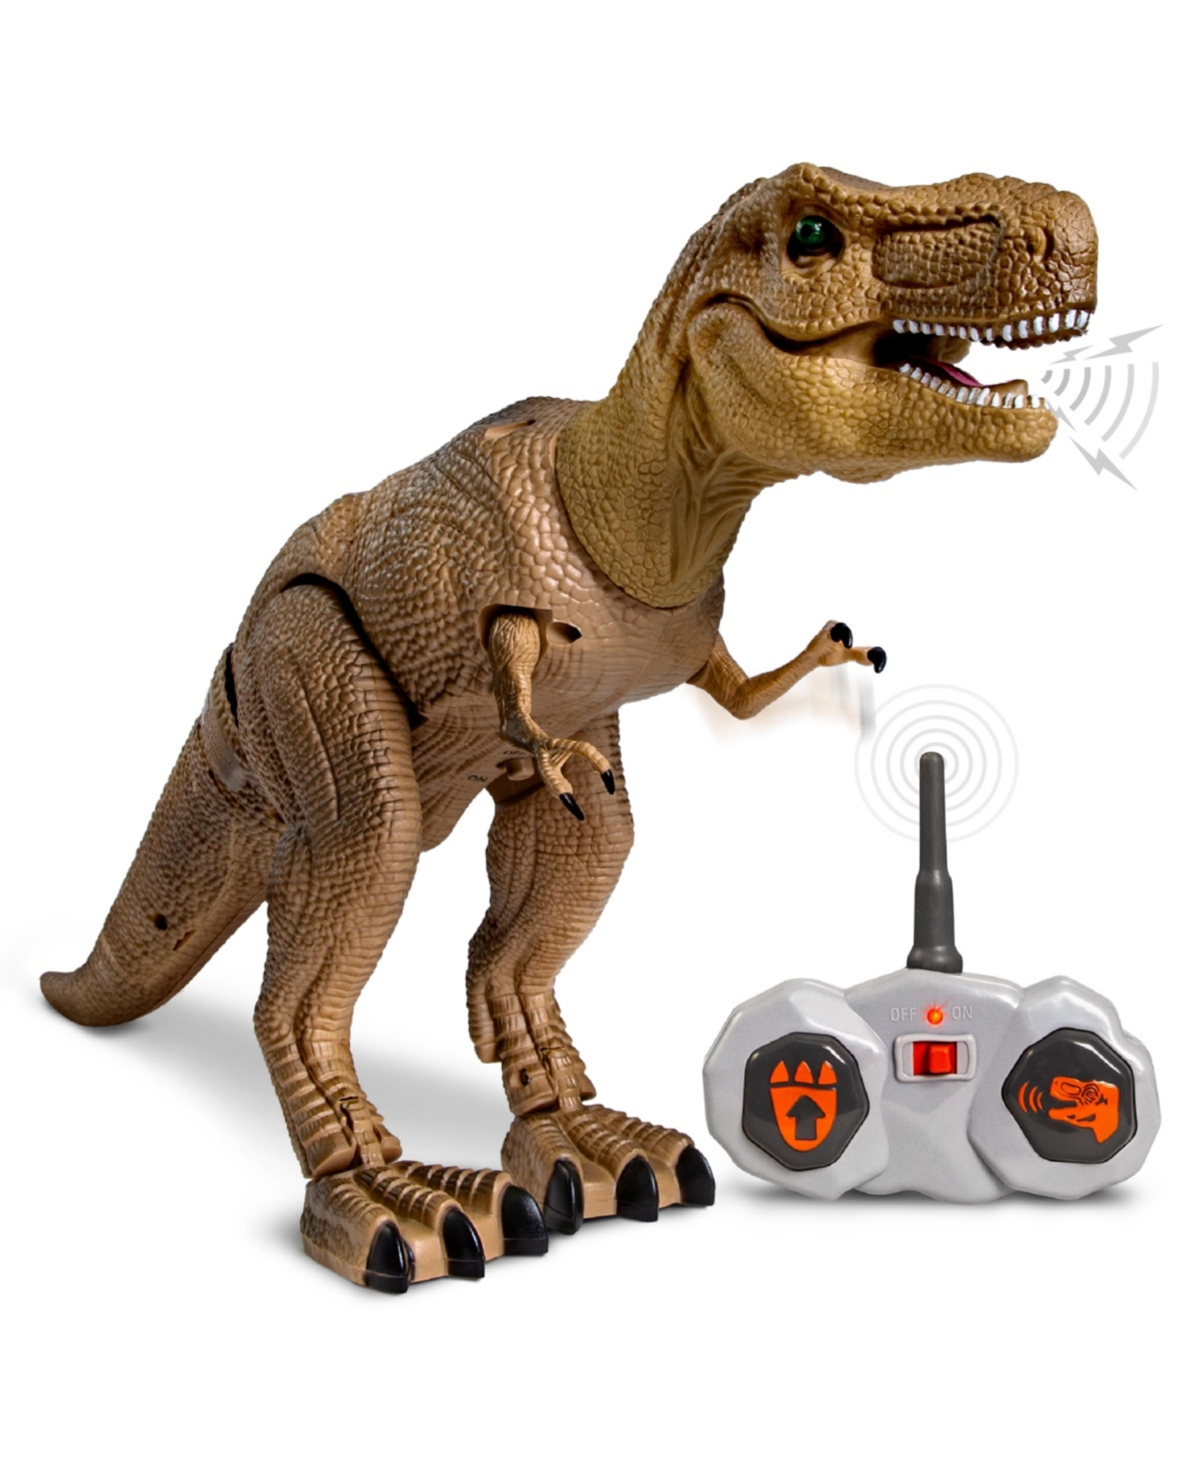 Discovery Rc T Rex Dinosaur Electronic Toy Action Figure In Brown